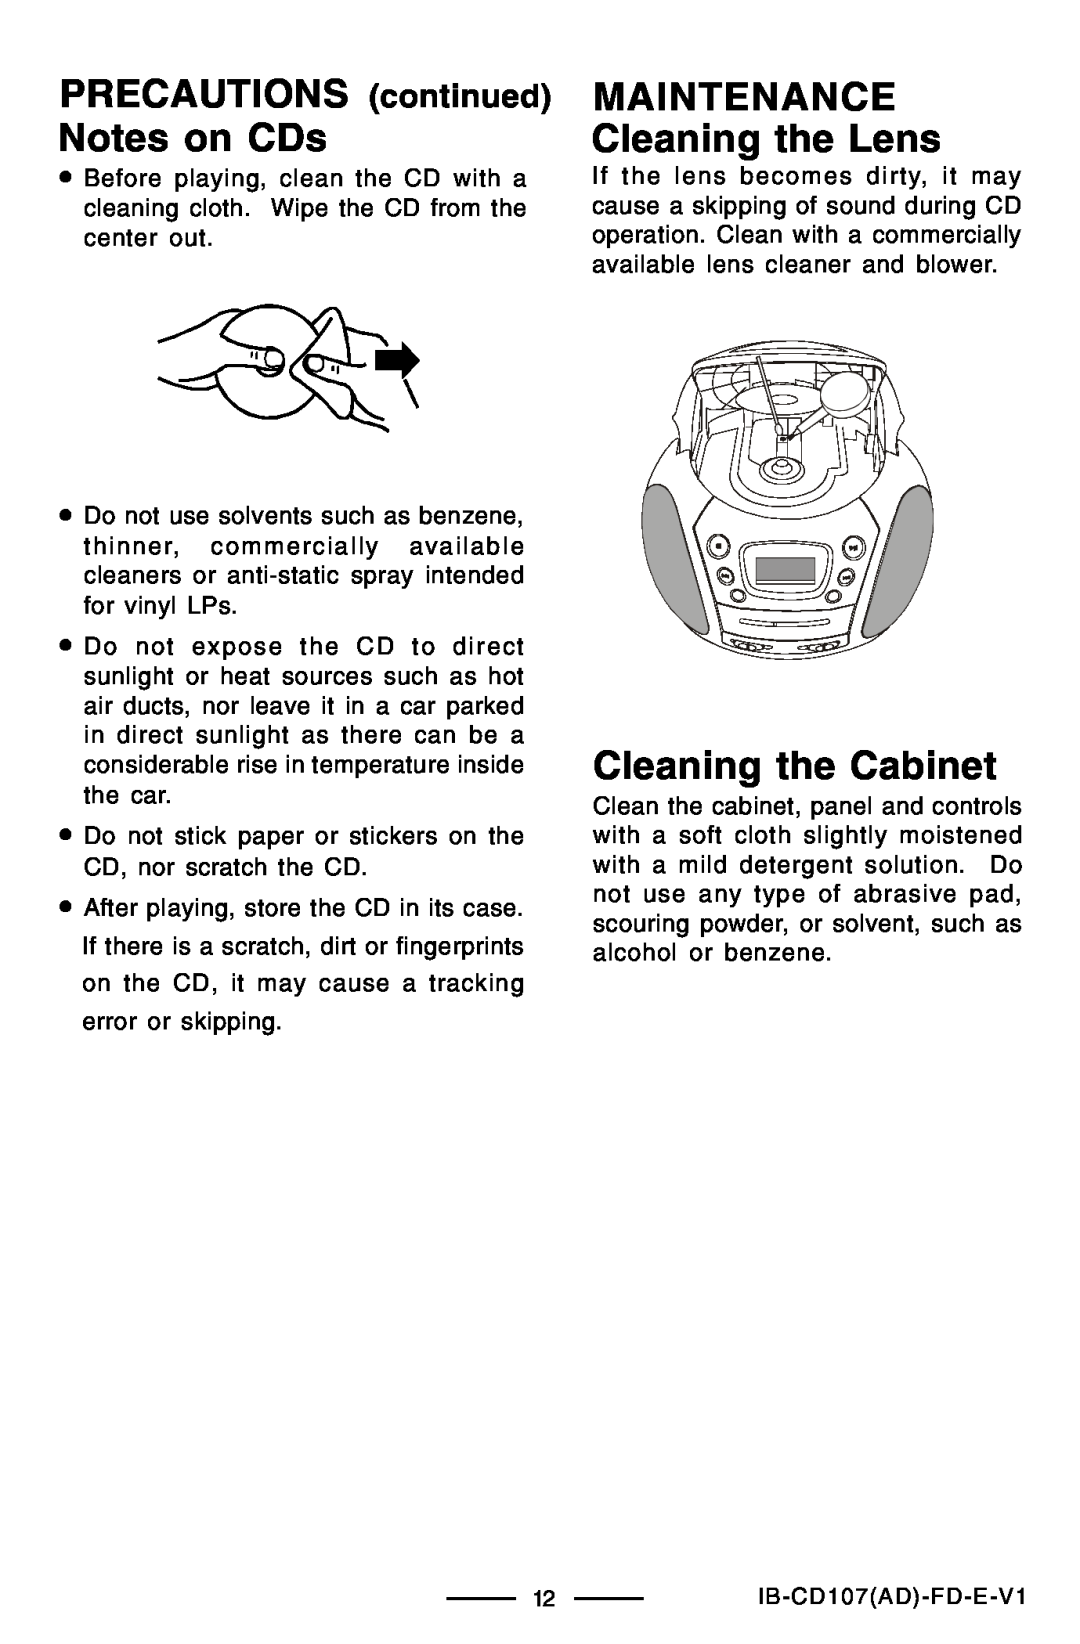 Lenoxx Electronics CD-107 manual PRECAUTIONS continued Notes on CDs, MAINTENANCE Cleaning the Lens, Cleaning the Cabinet 